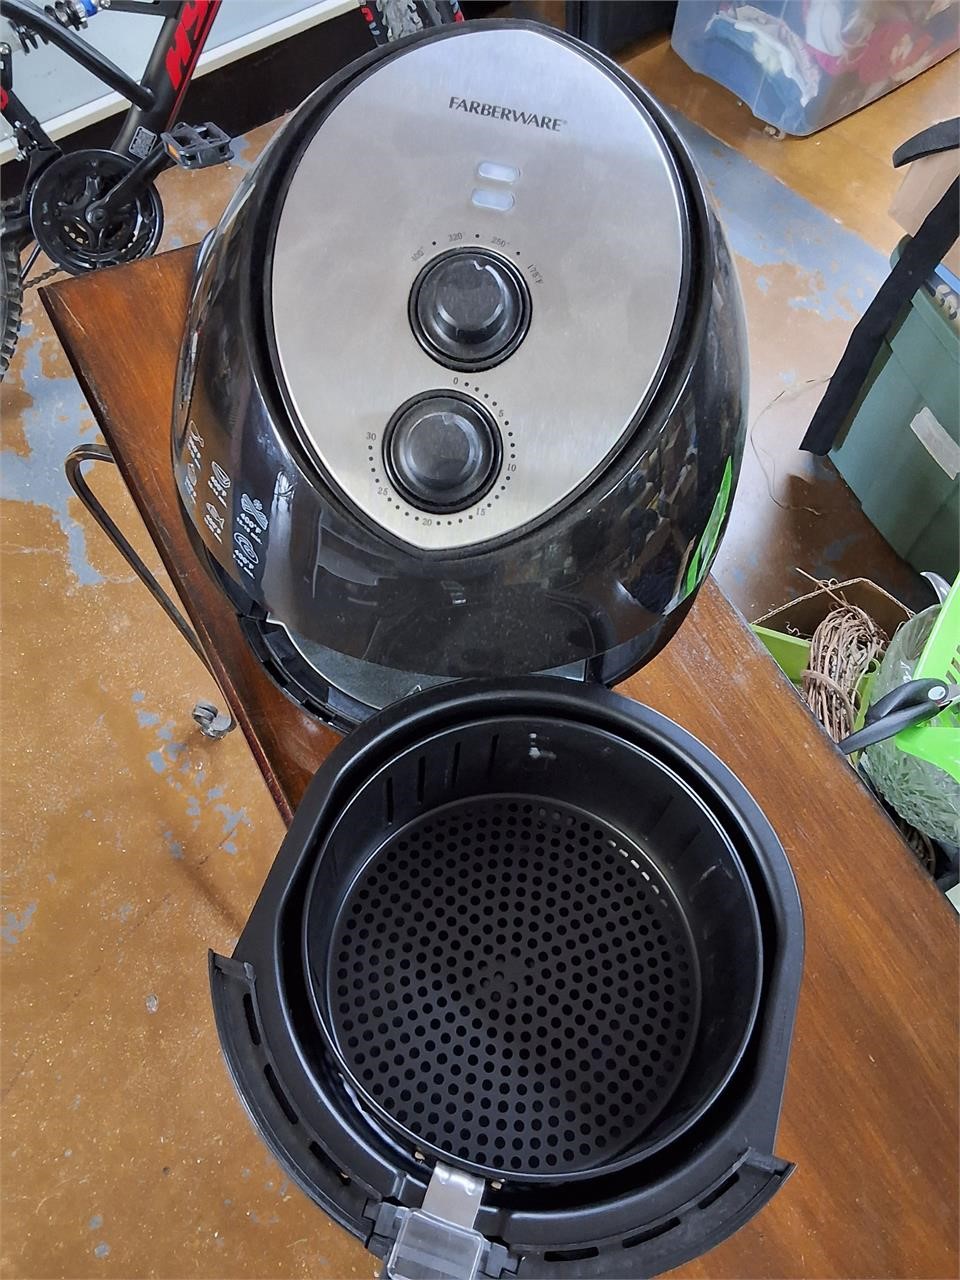 Air fryer excellent condition - like new